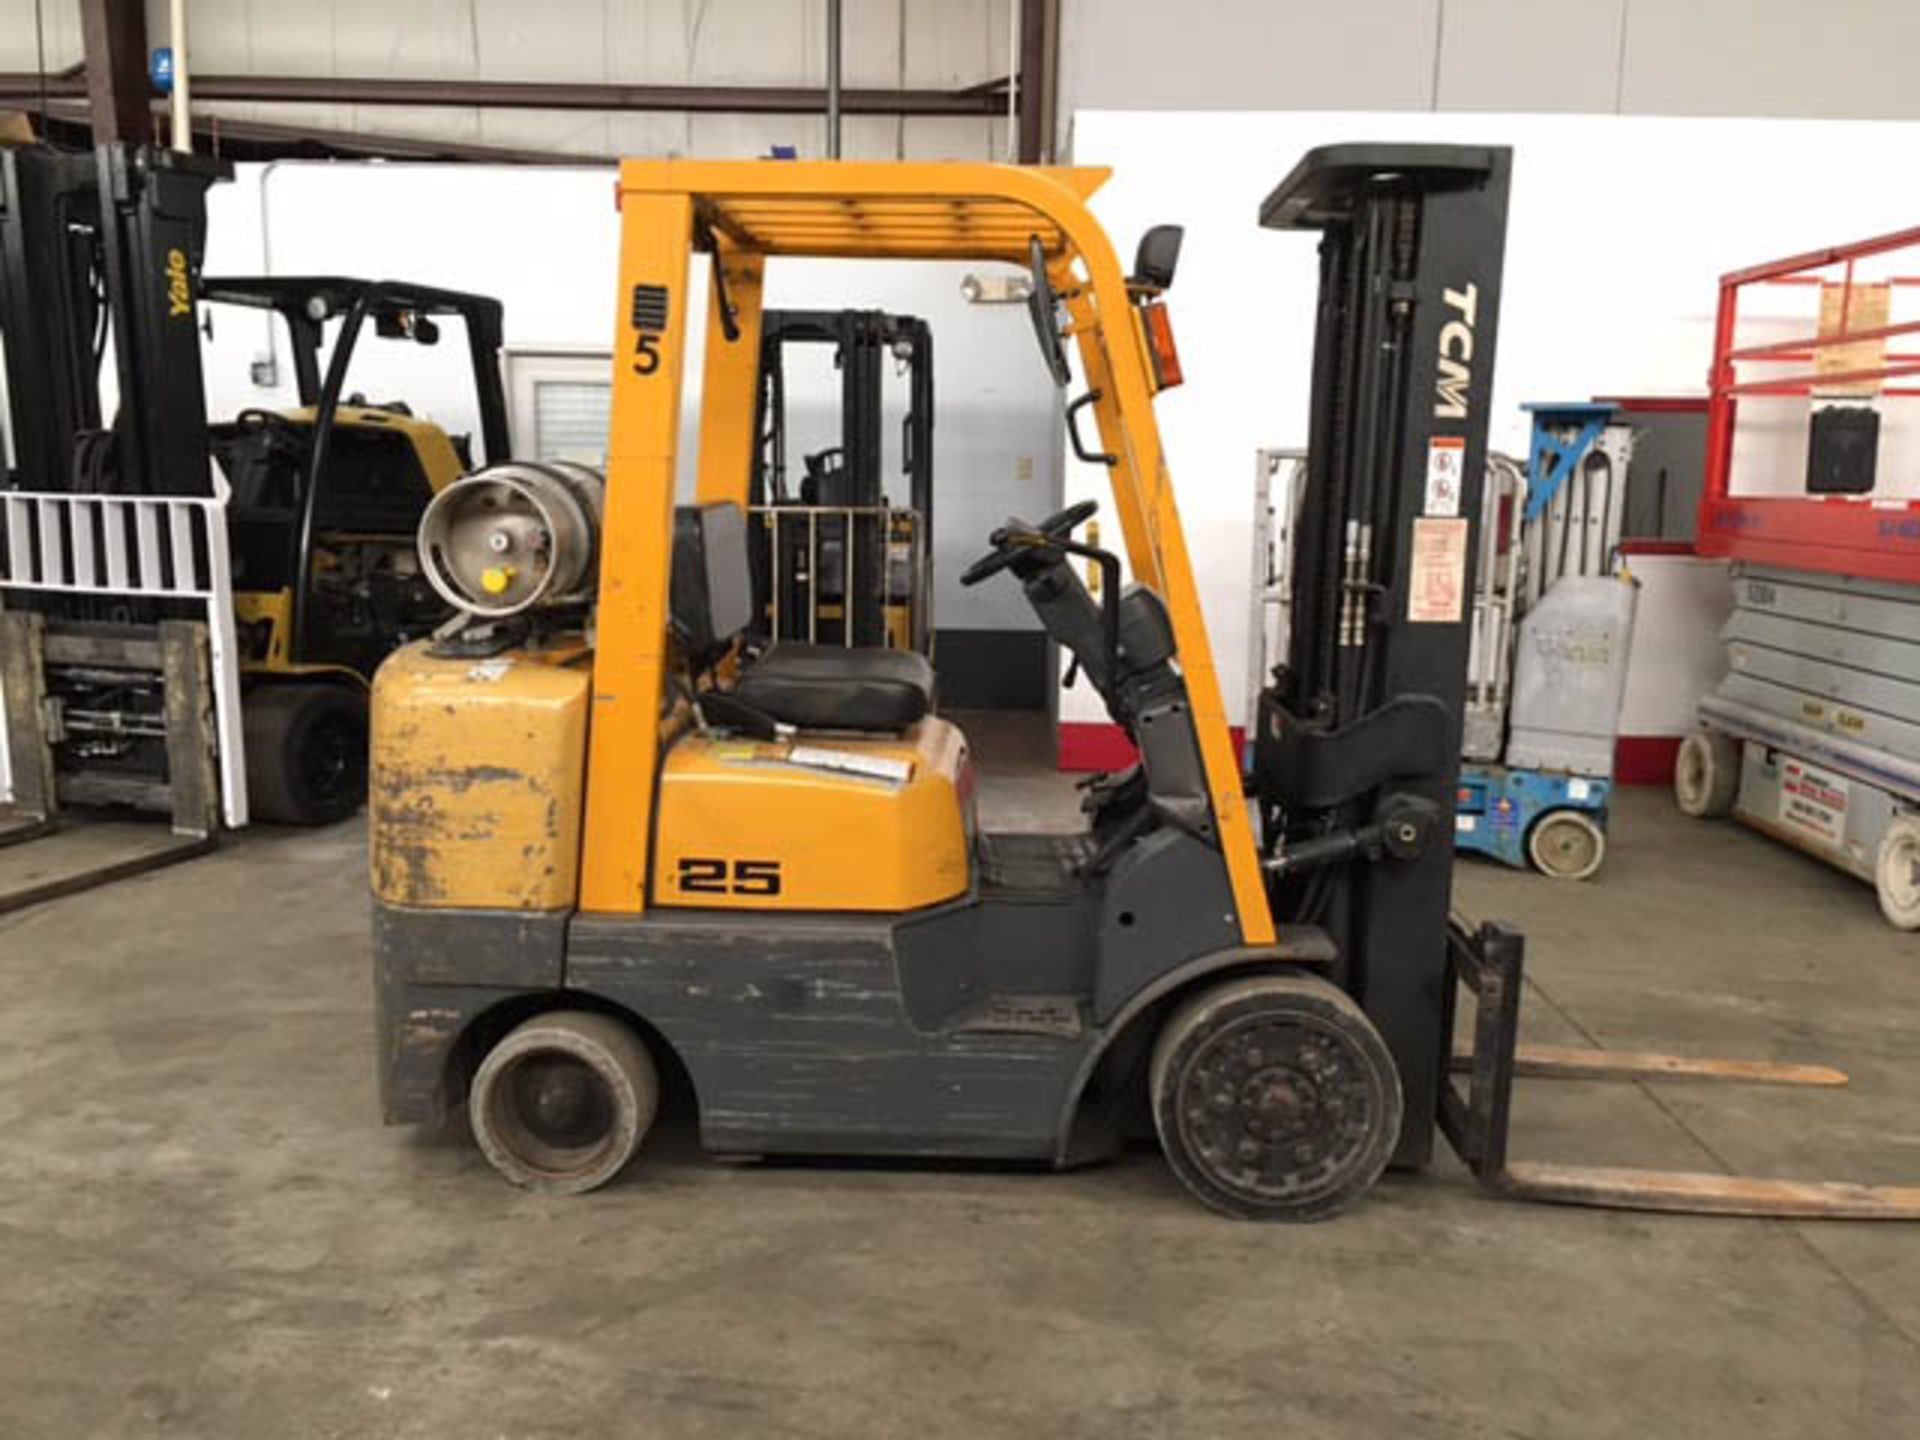 2005 TCM 5;000-LB.; MOD: FCG25; SN: A47M00625; LPG; SOLID TIRES; 3-STAGE MAST; 189" LIFT, 8,224 Hrs - Image 3 of 5